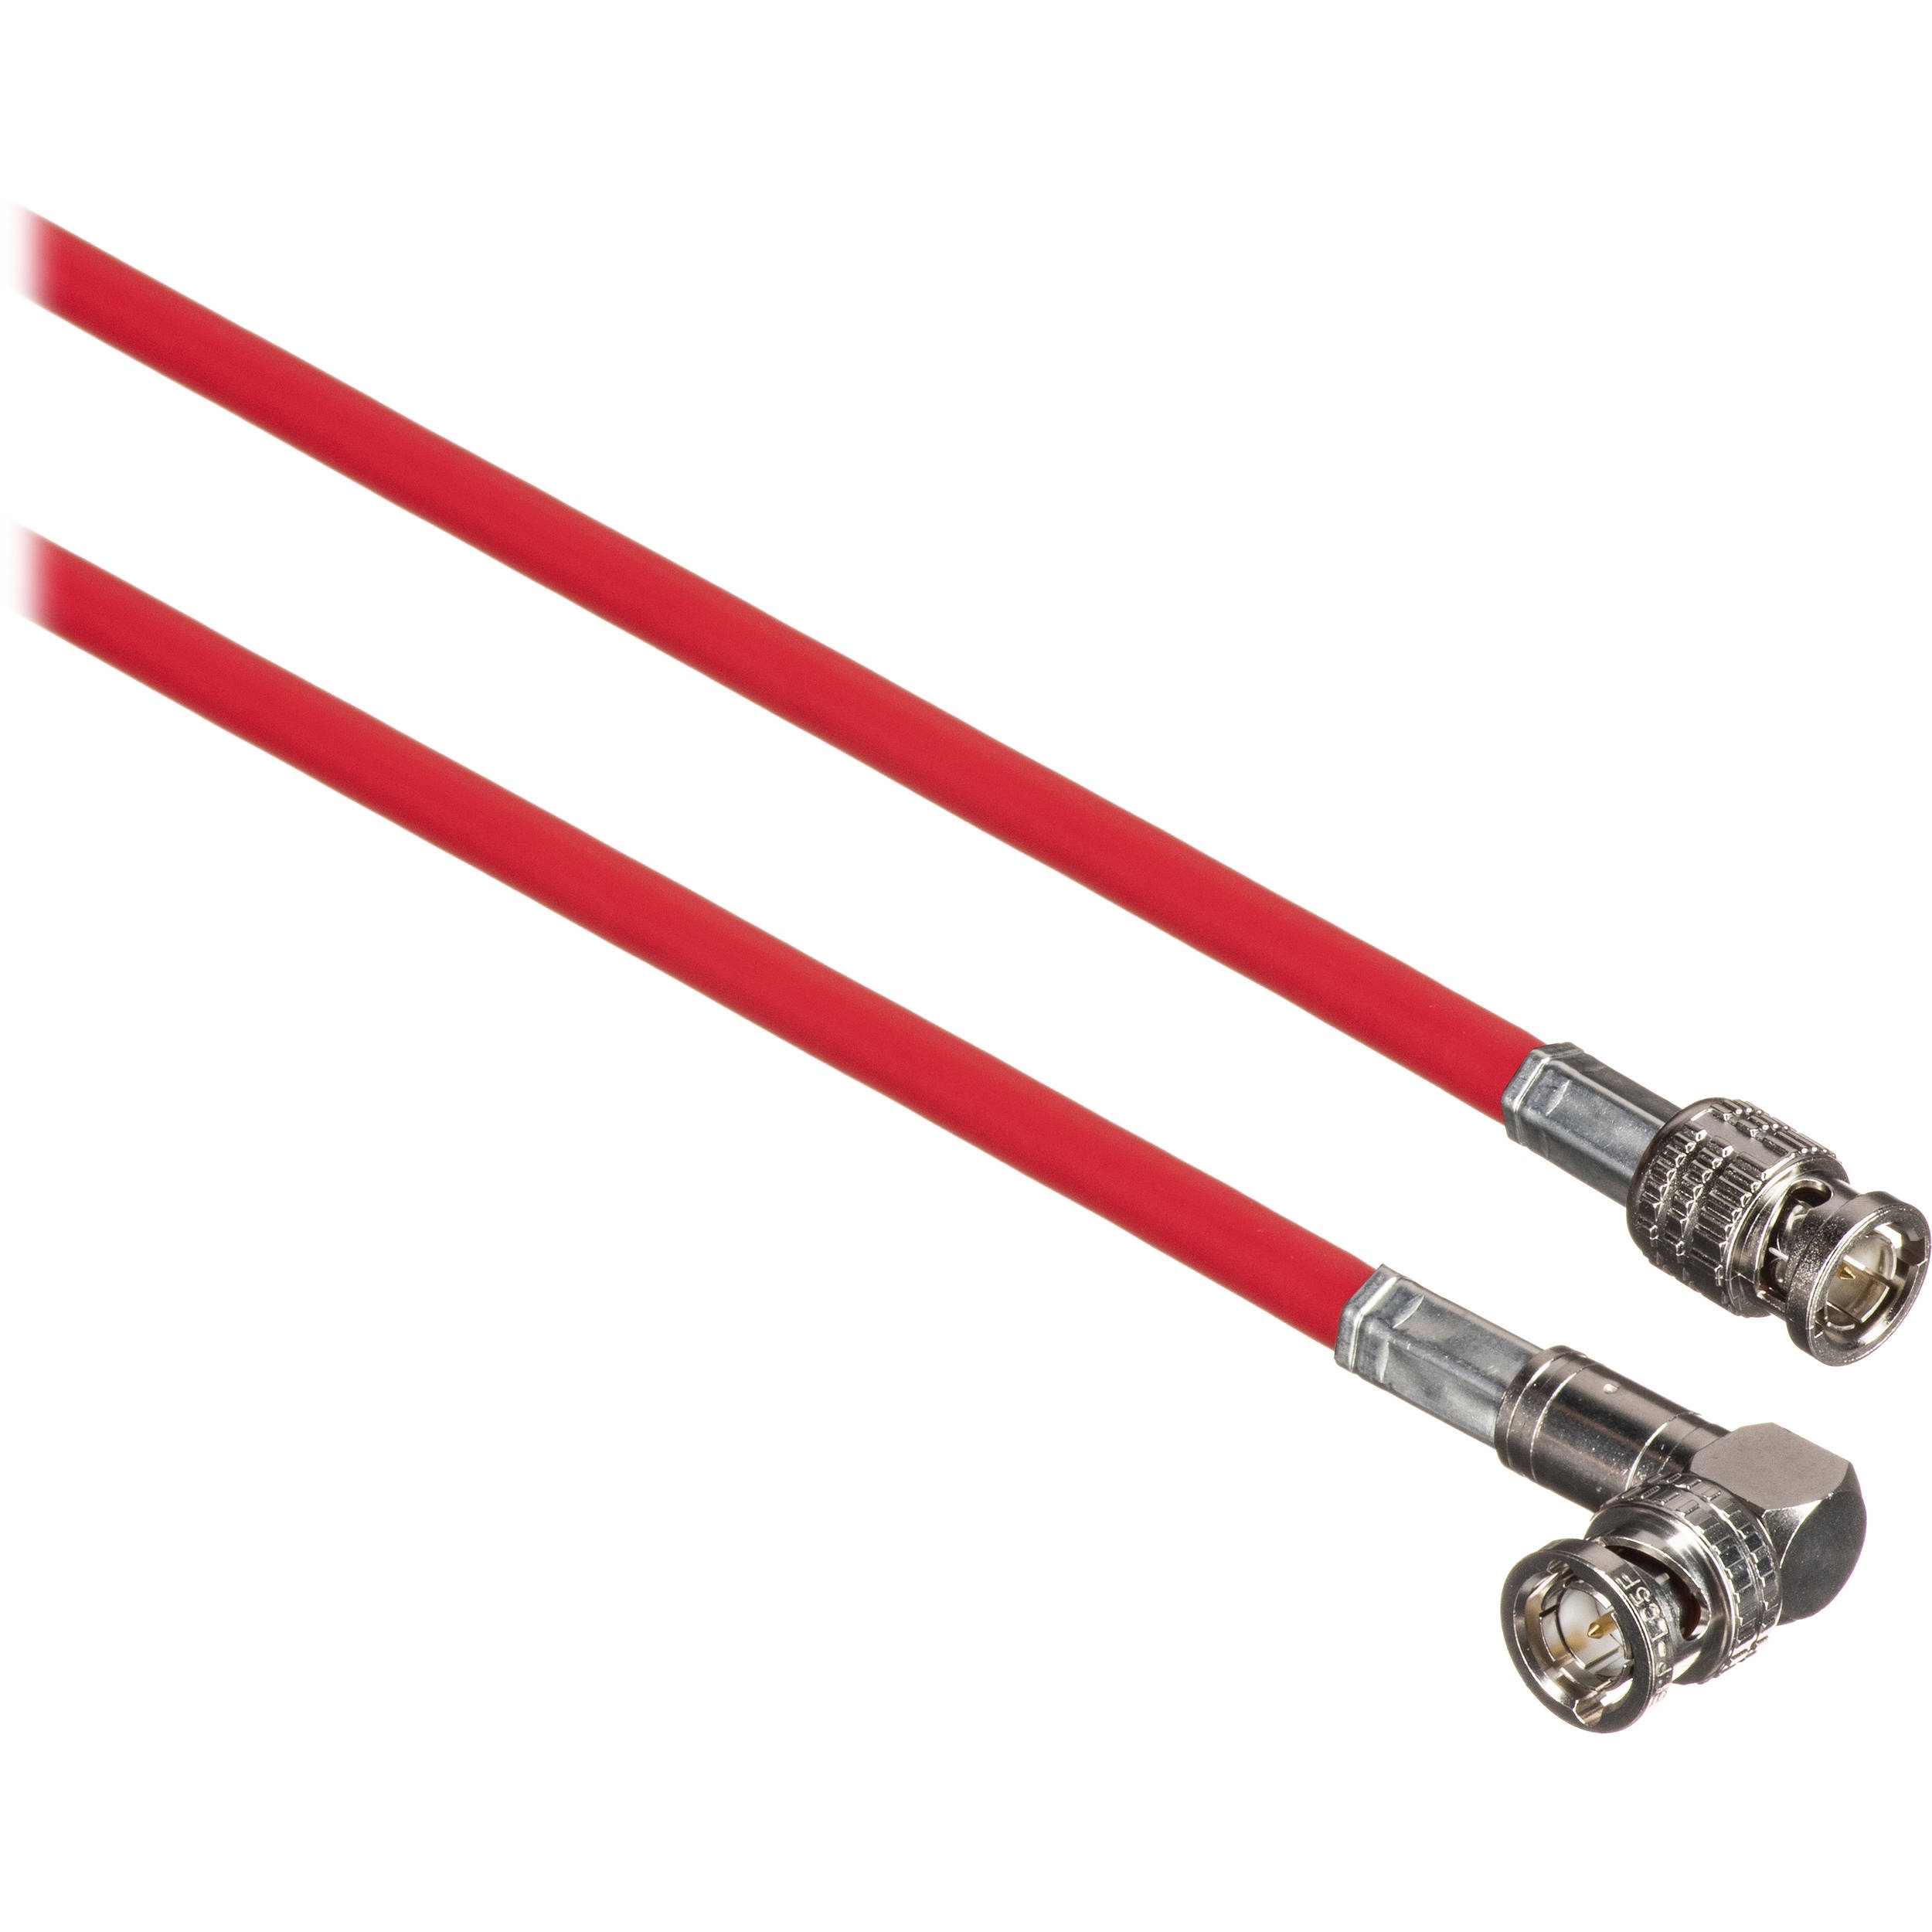 Canare Male to Right Angle Male HD-SDI Video Cable (Red, 20')